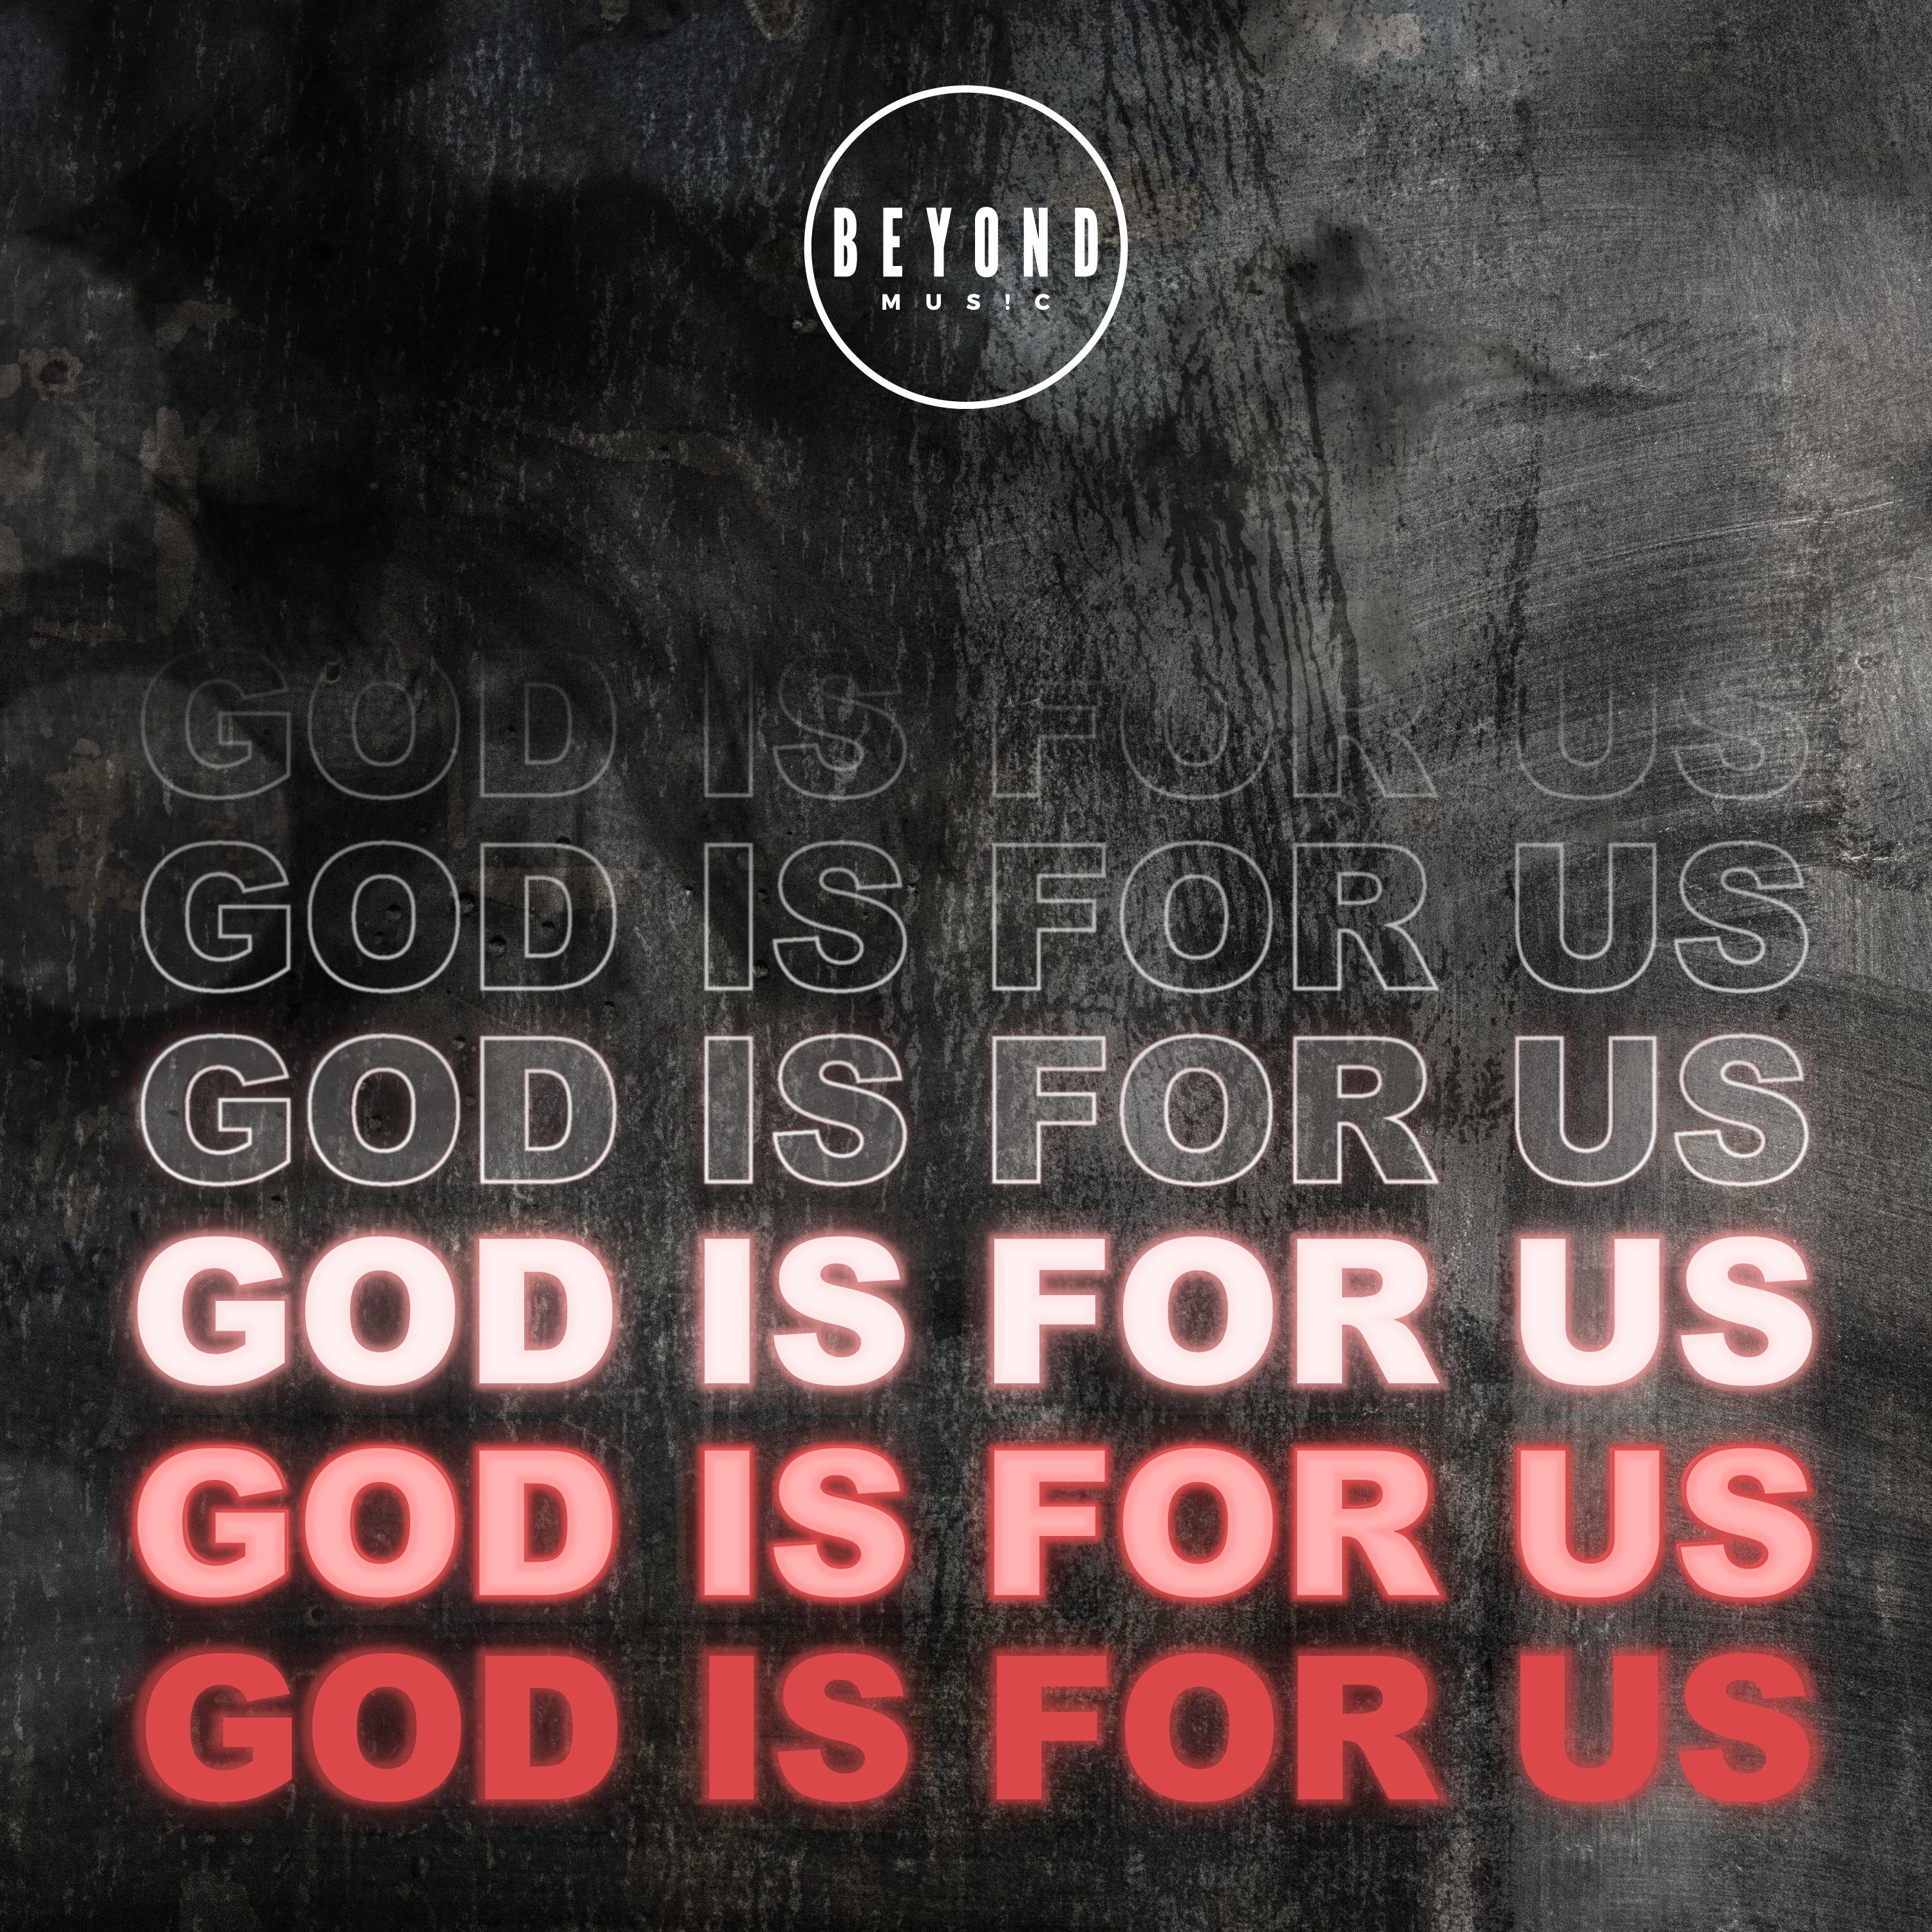 God Is for Us